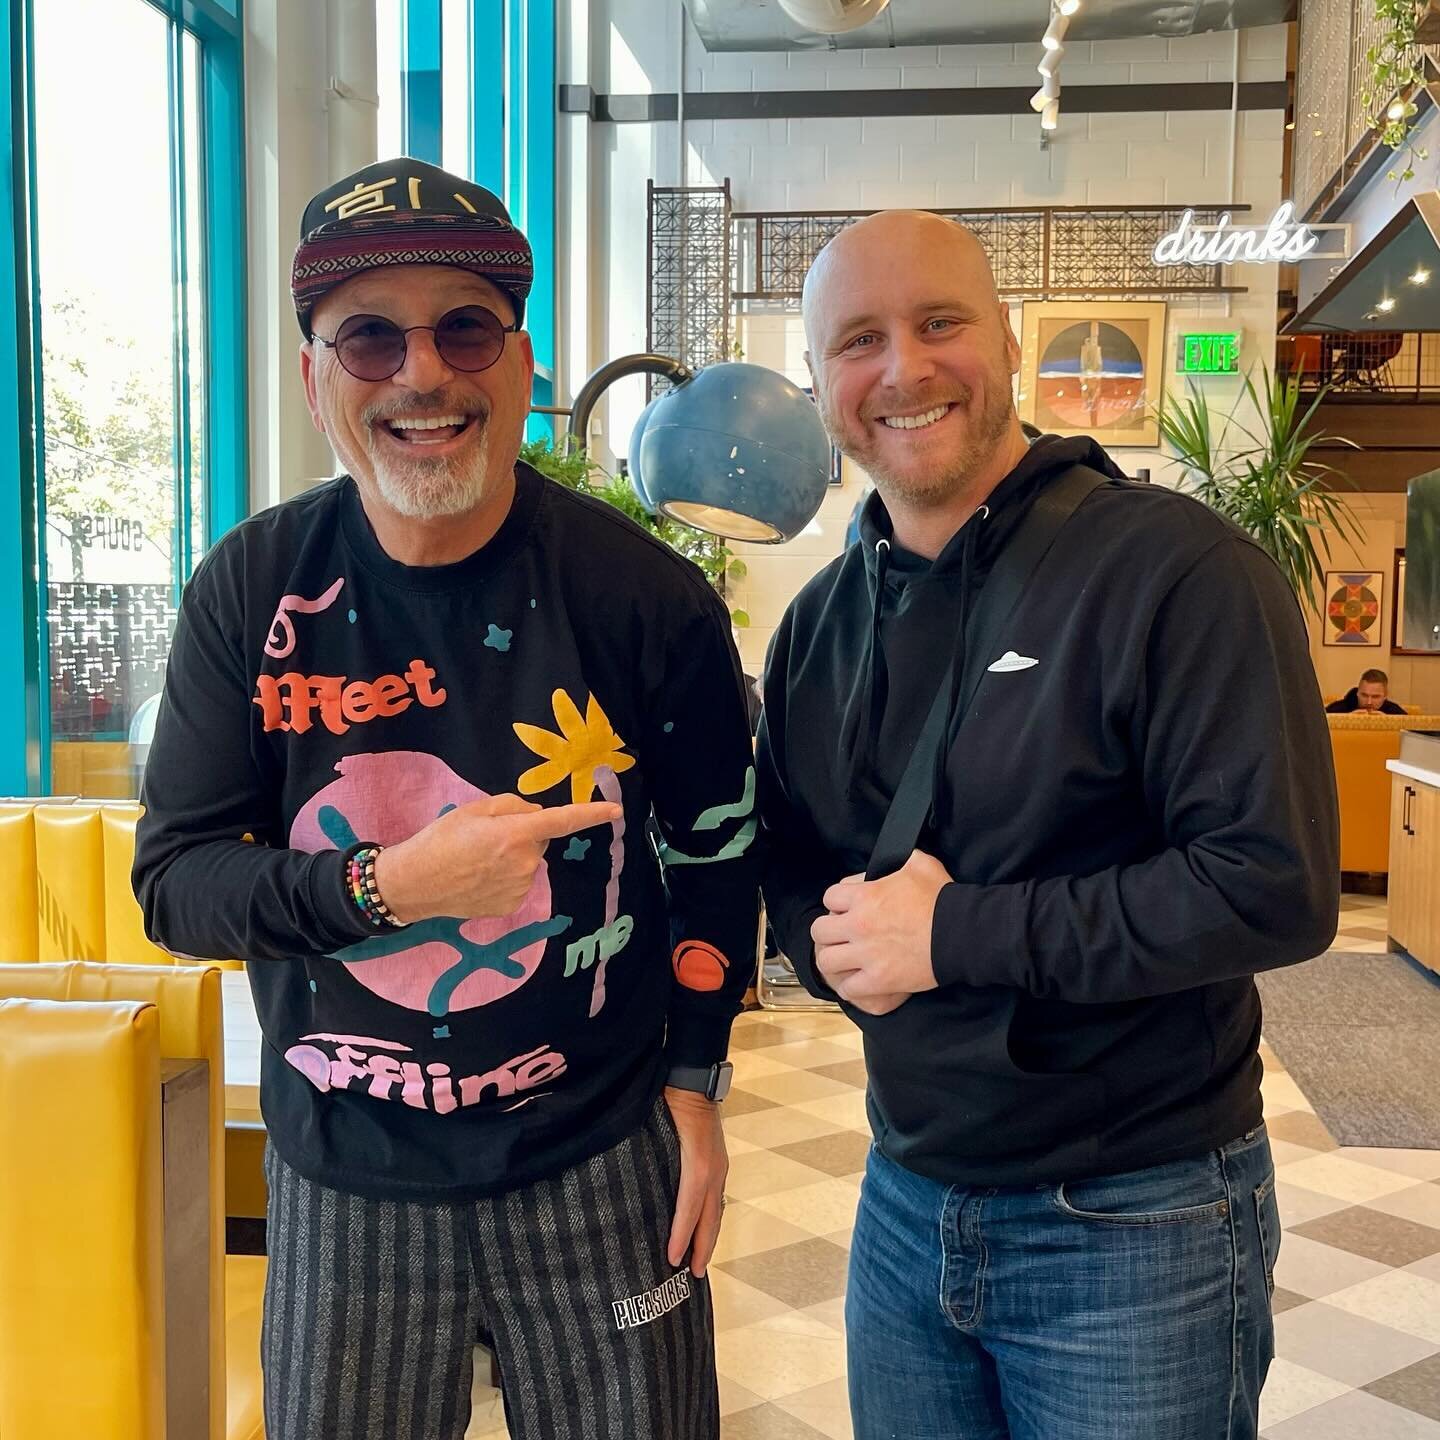 Howie and a cup of coffee. Met my first favorite comedian today. Thank you for the decades of laughs!!!

When my dad was on his death bed, the thing they made him laugh the most was @howiemandel stand up comedy. He would laugh u til his nurse told us